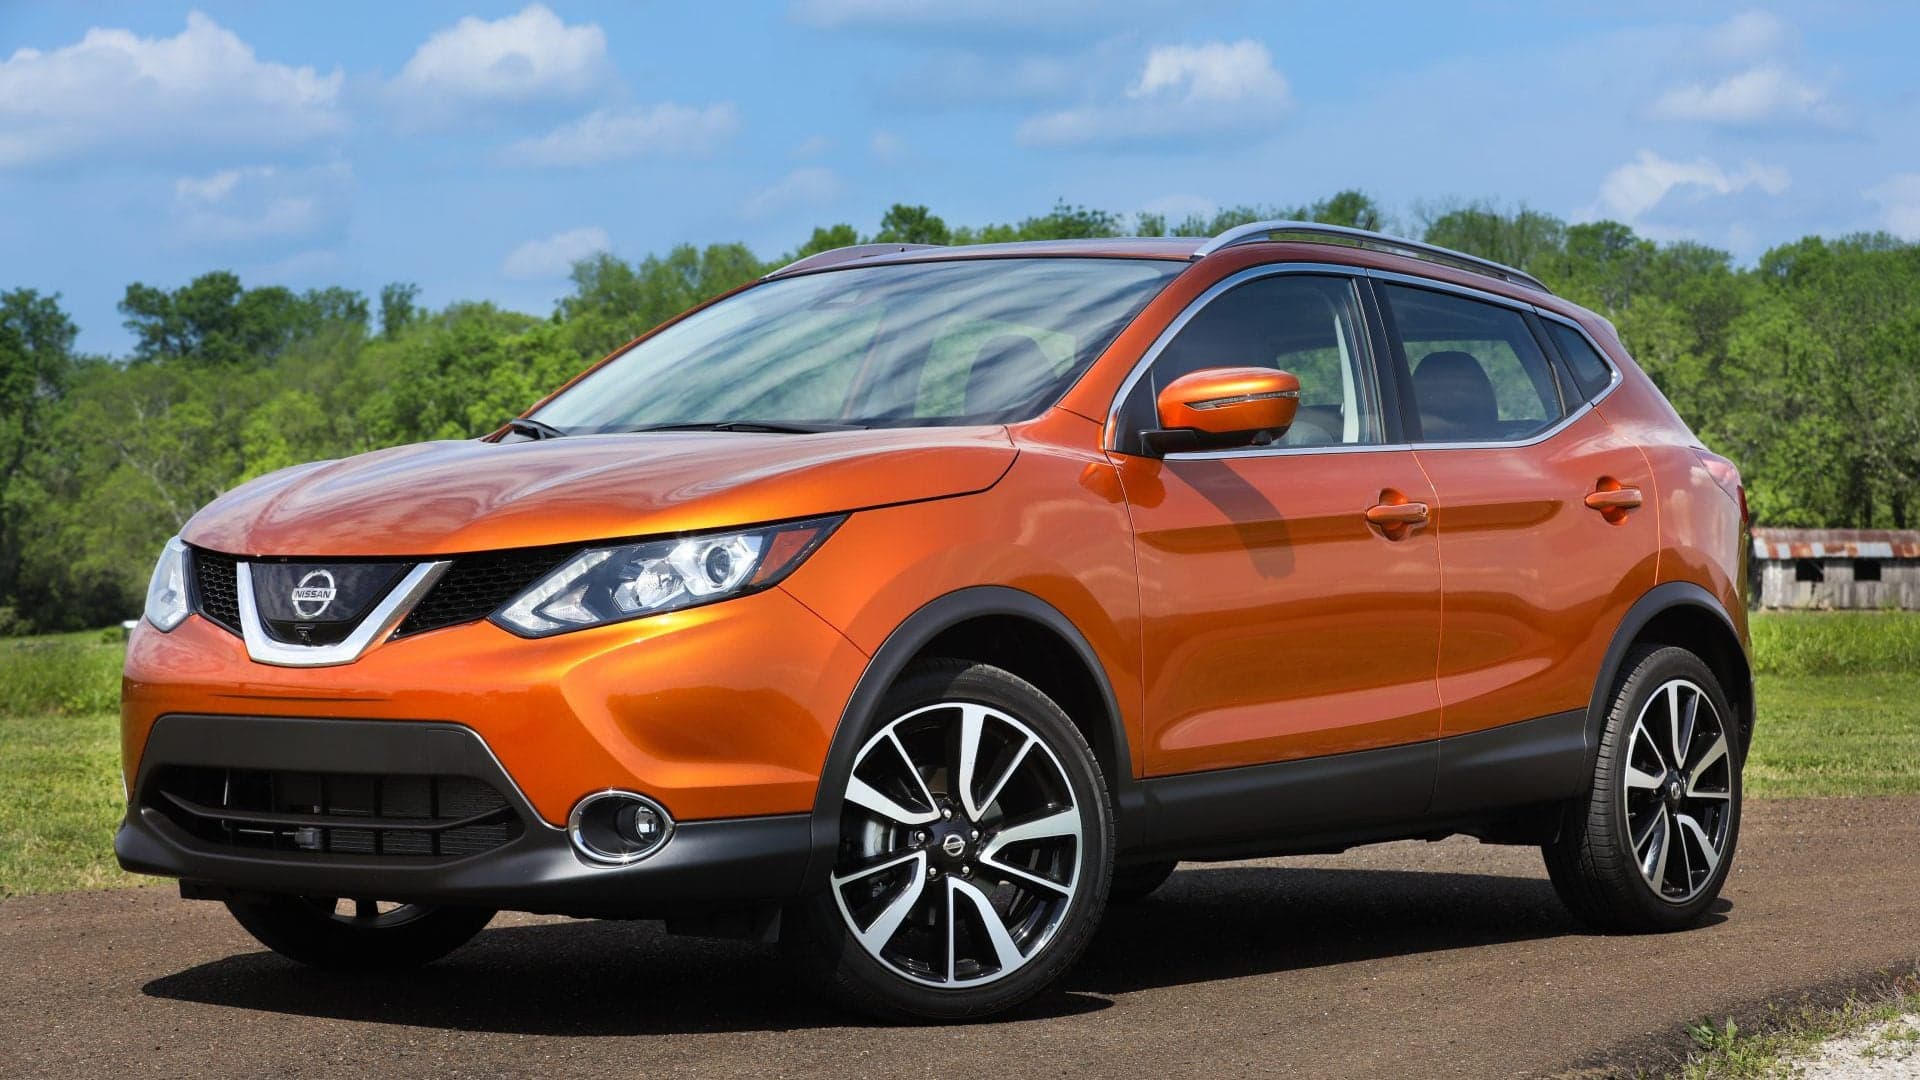 2017 Nissan Rogue Sport On Sale in May, Starting at $21,420